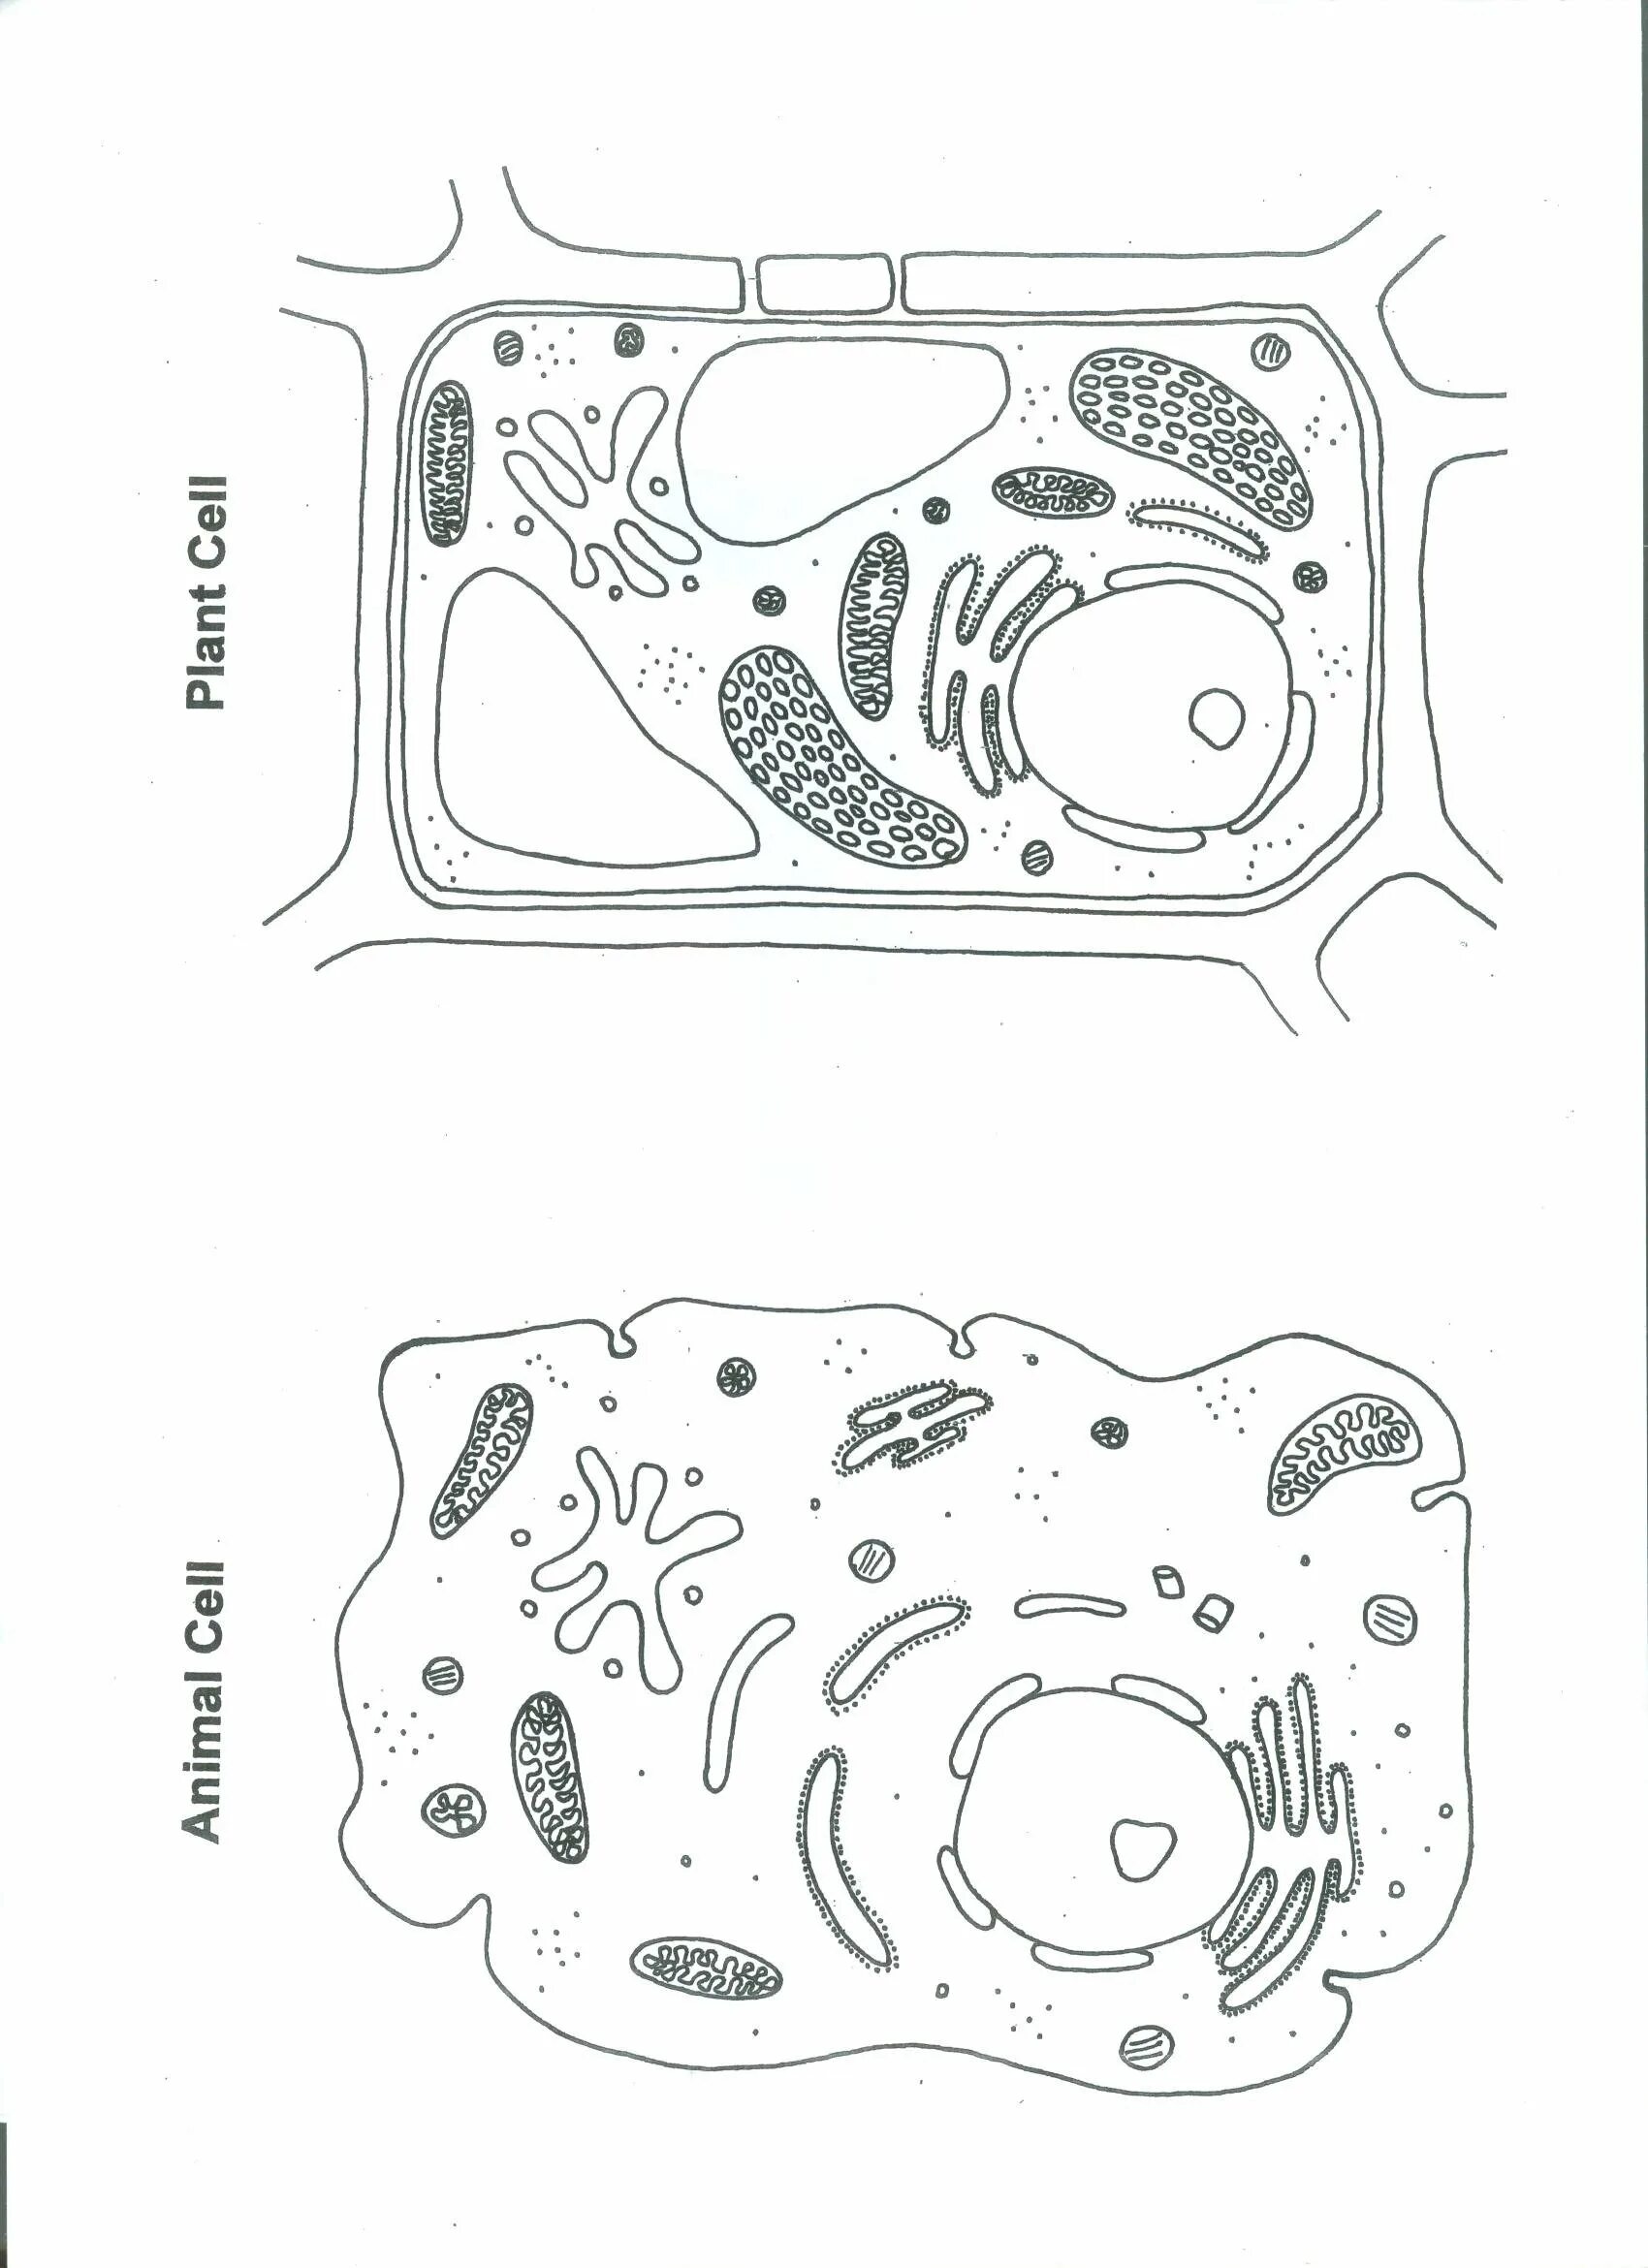 Coloring the delicate structure of a plant cell